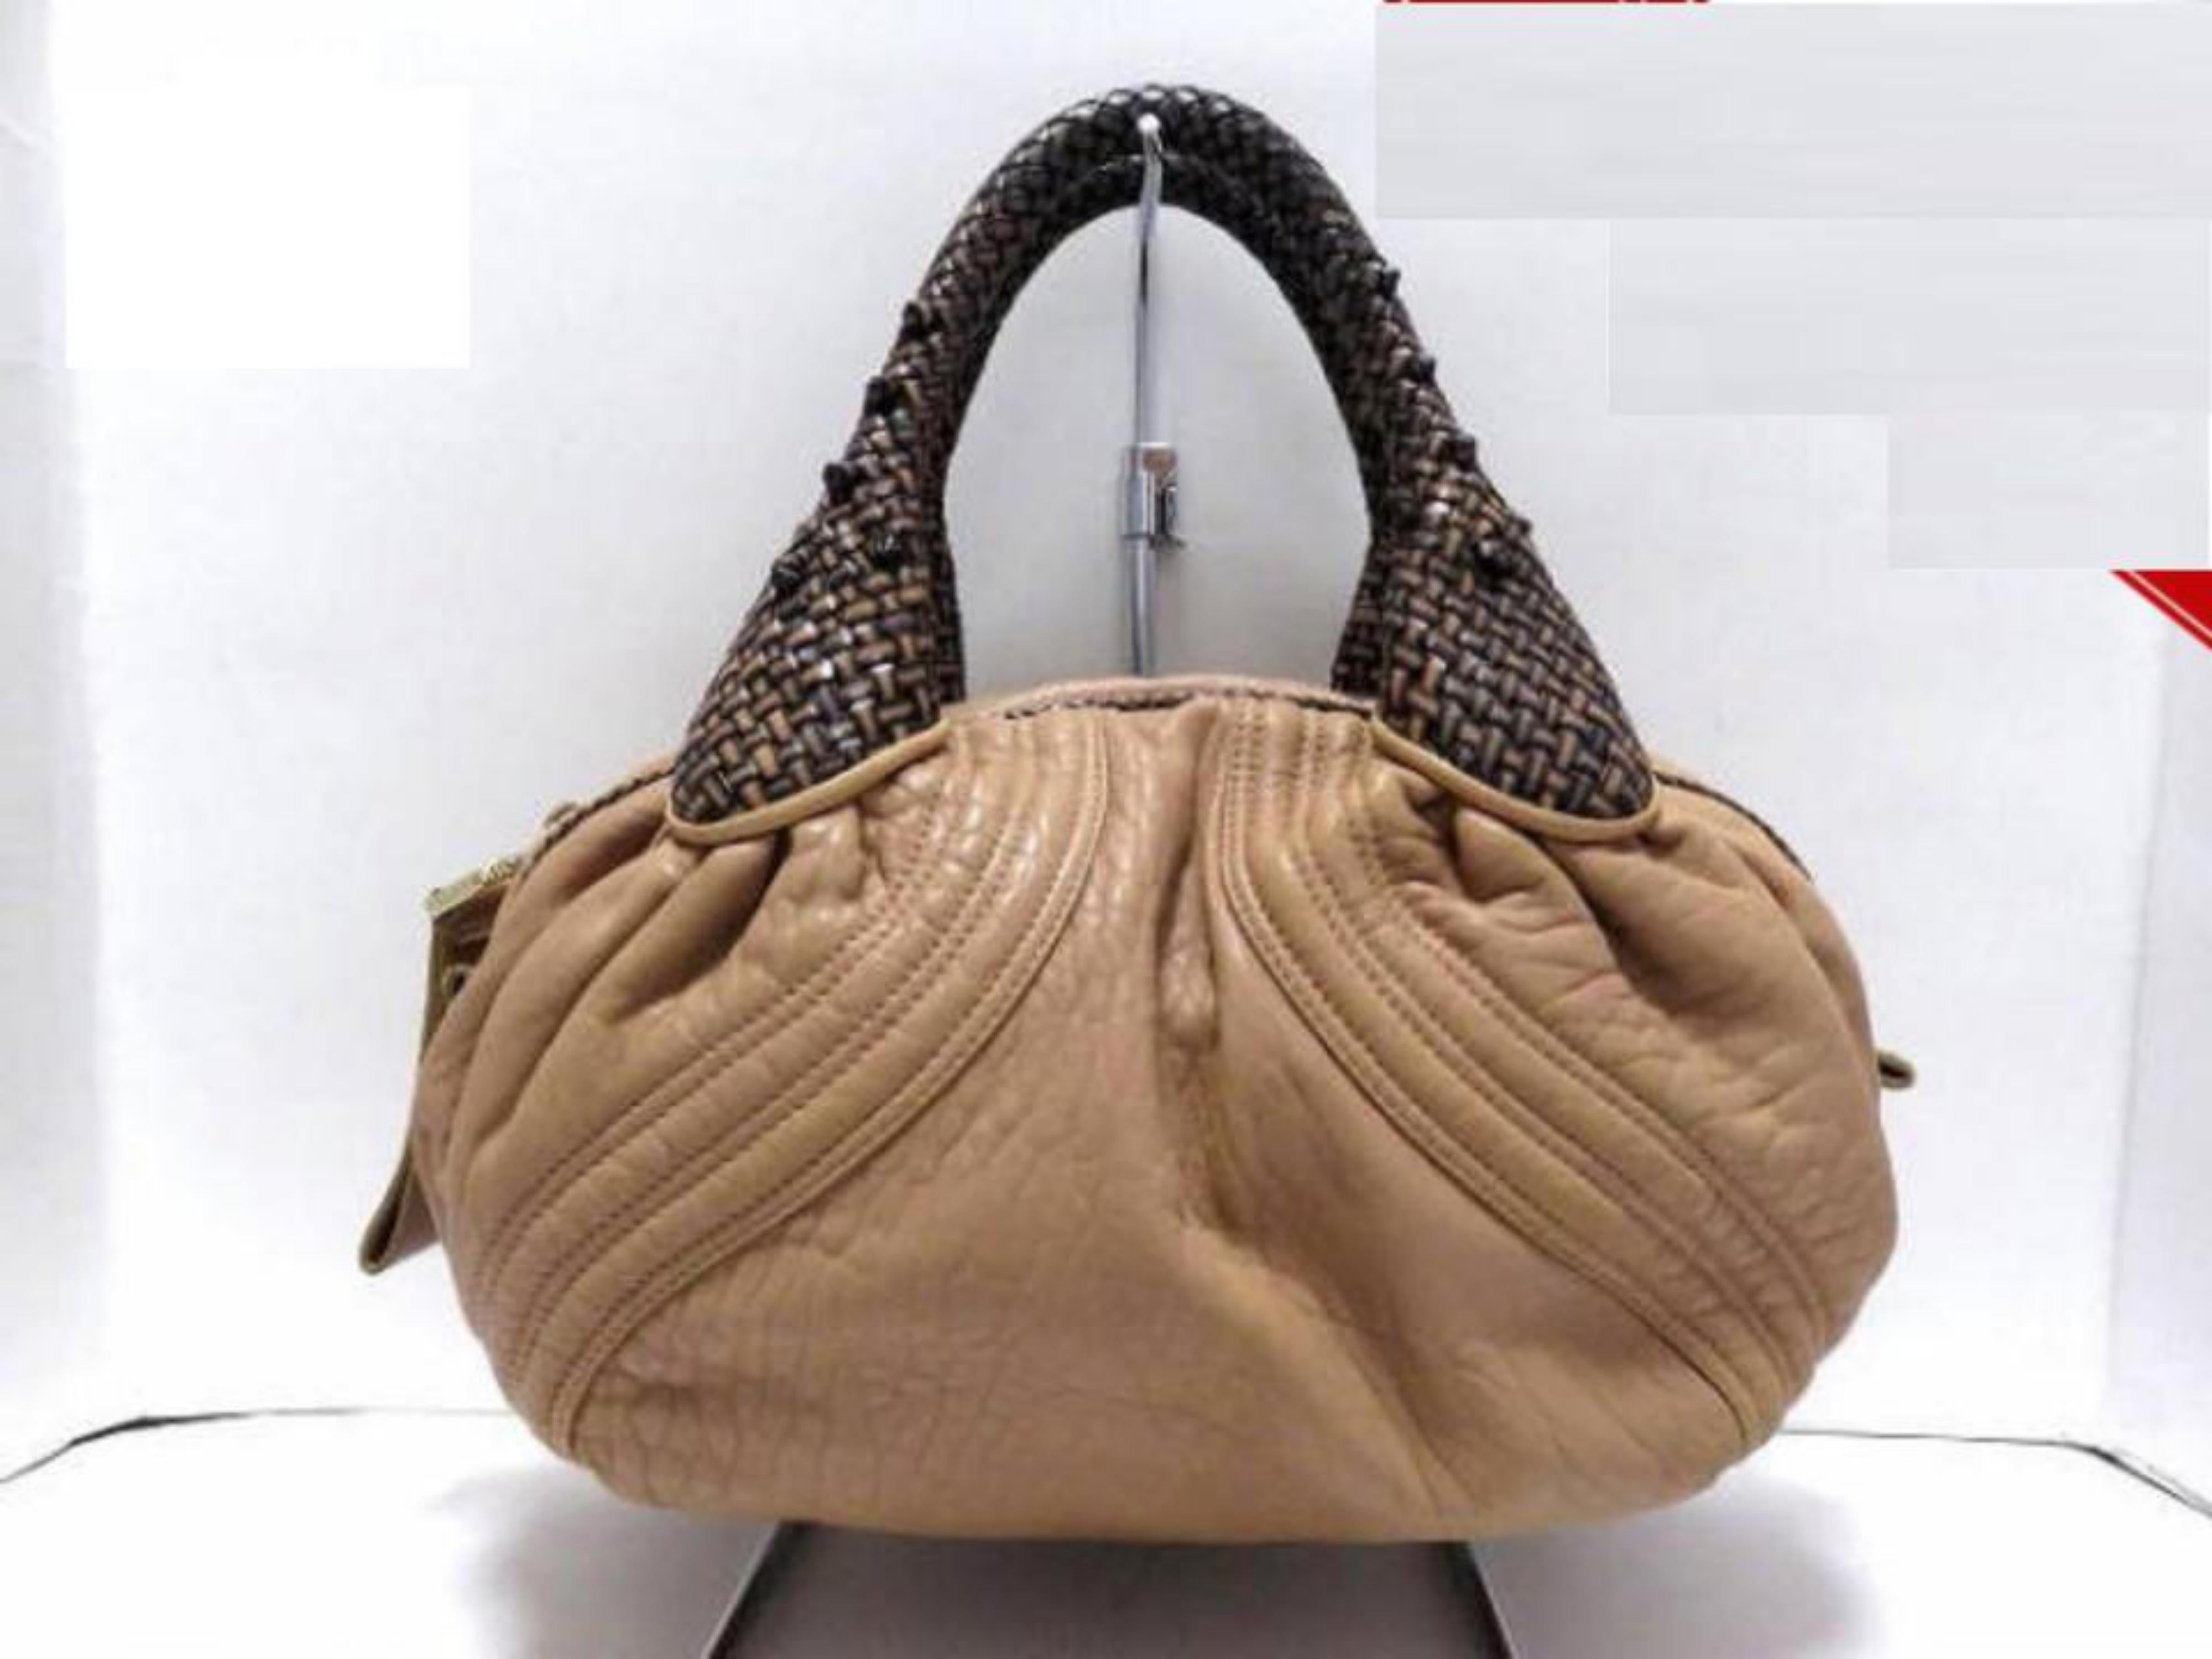 Fendi Spy 228080 Nude Leather Hobo Bag In Good Condition For Sale In Forest Hills, NY